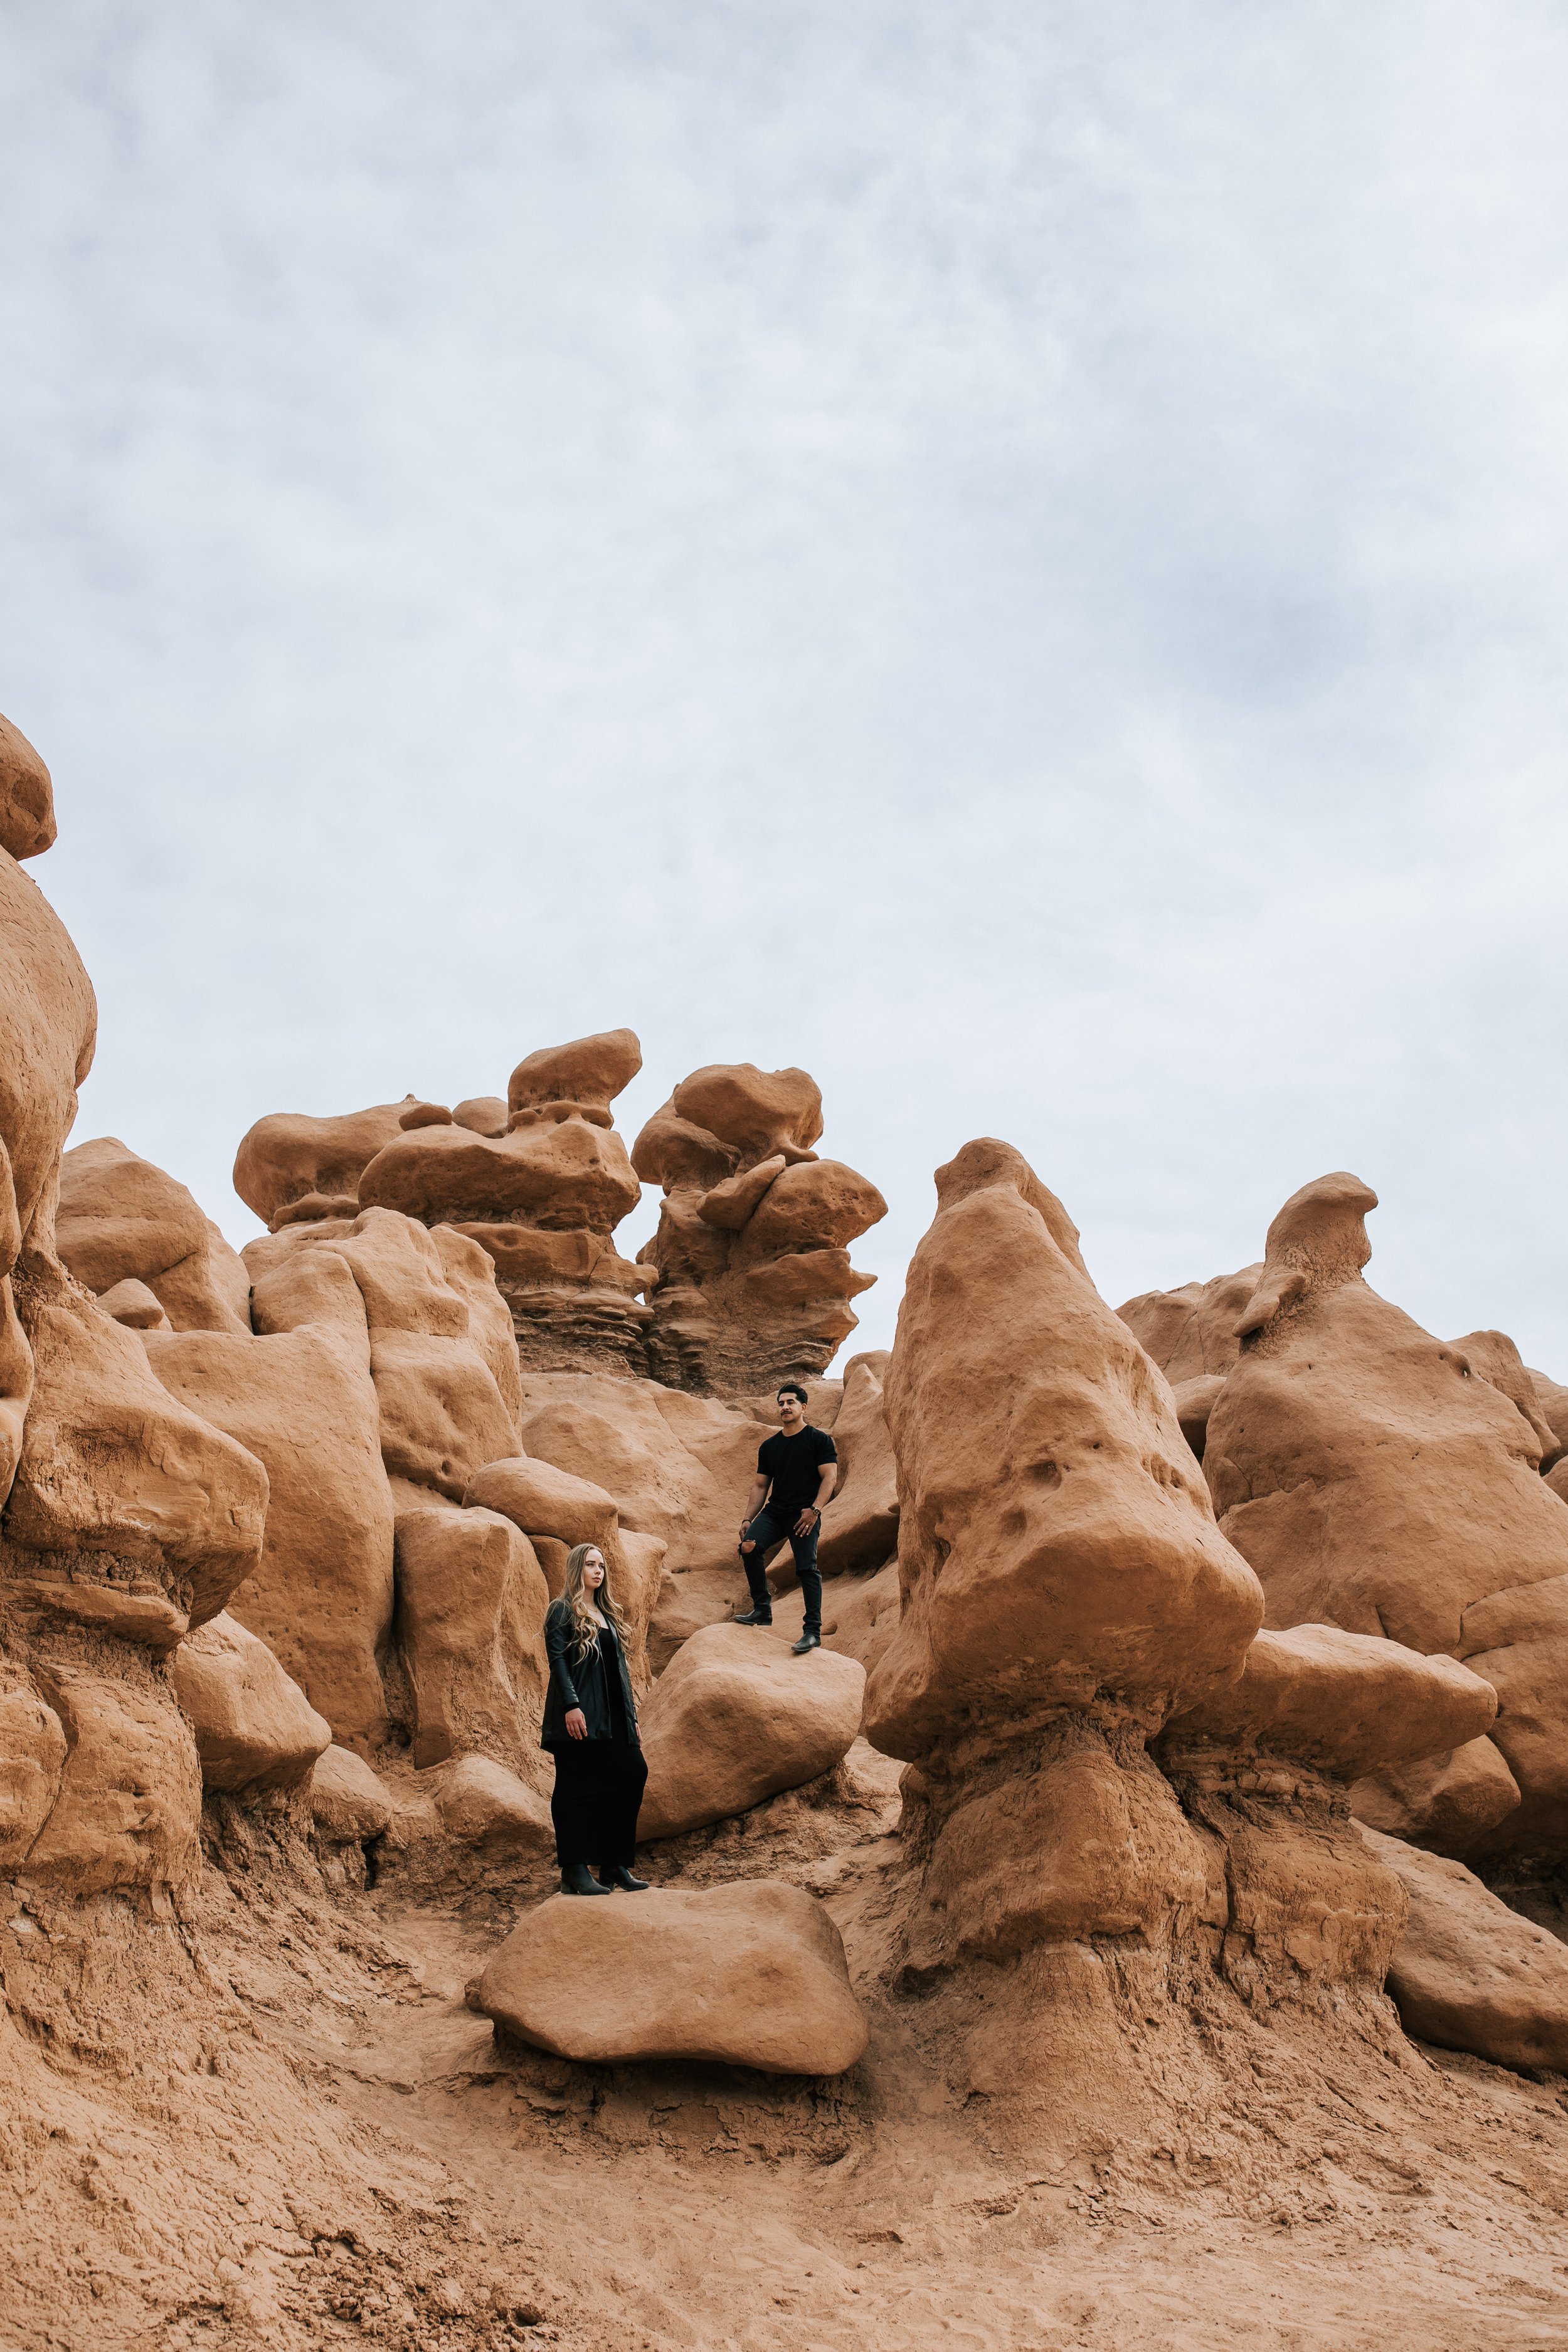  An engaged couple poses in the red rocks in Goblin Valley during an engagement session with Emily Jenkins Photography. black engagement outfits granola location engagements #EmilyJenkinsPhotography #EmilyJenkinsEngagements #HanksvillePhotography #Go